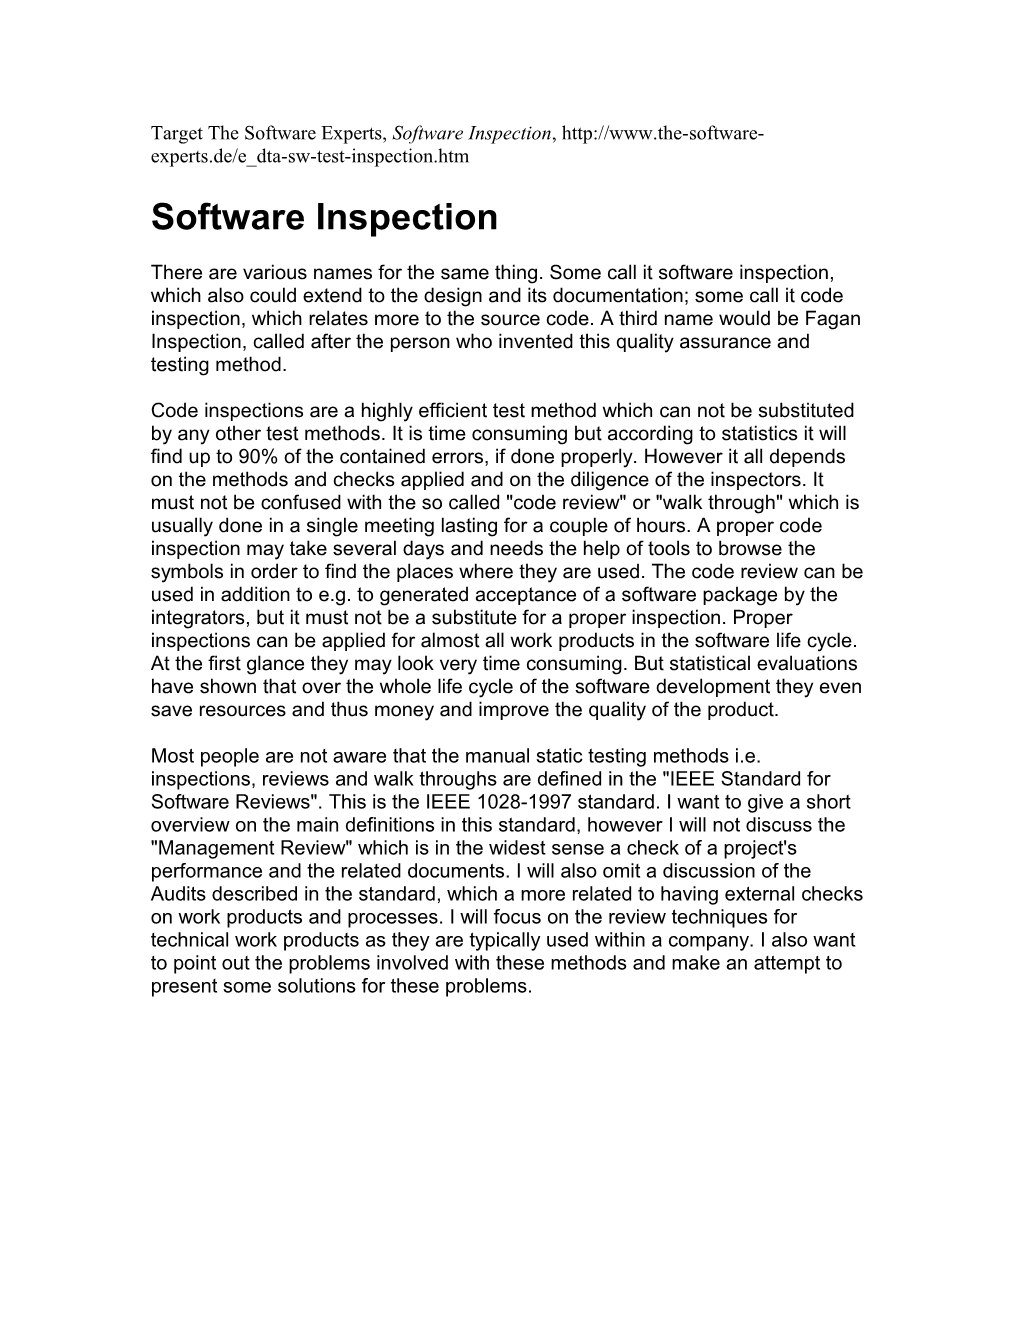 Target the Software Experts, Software Inspection